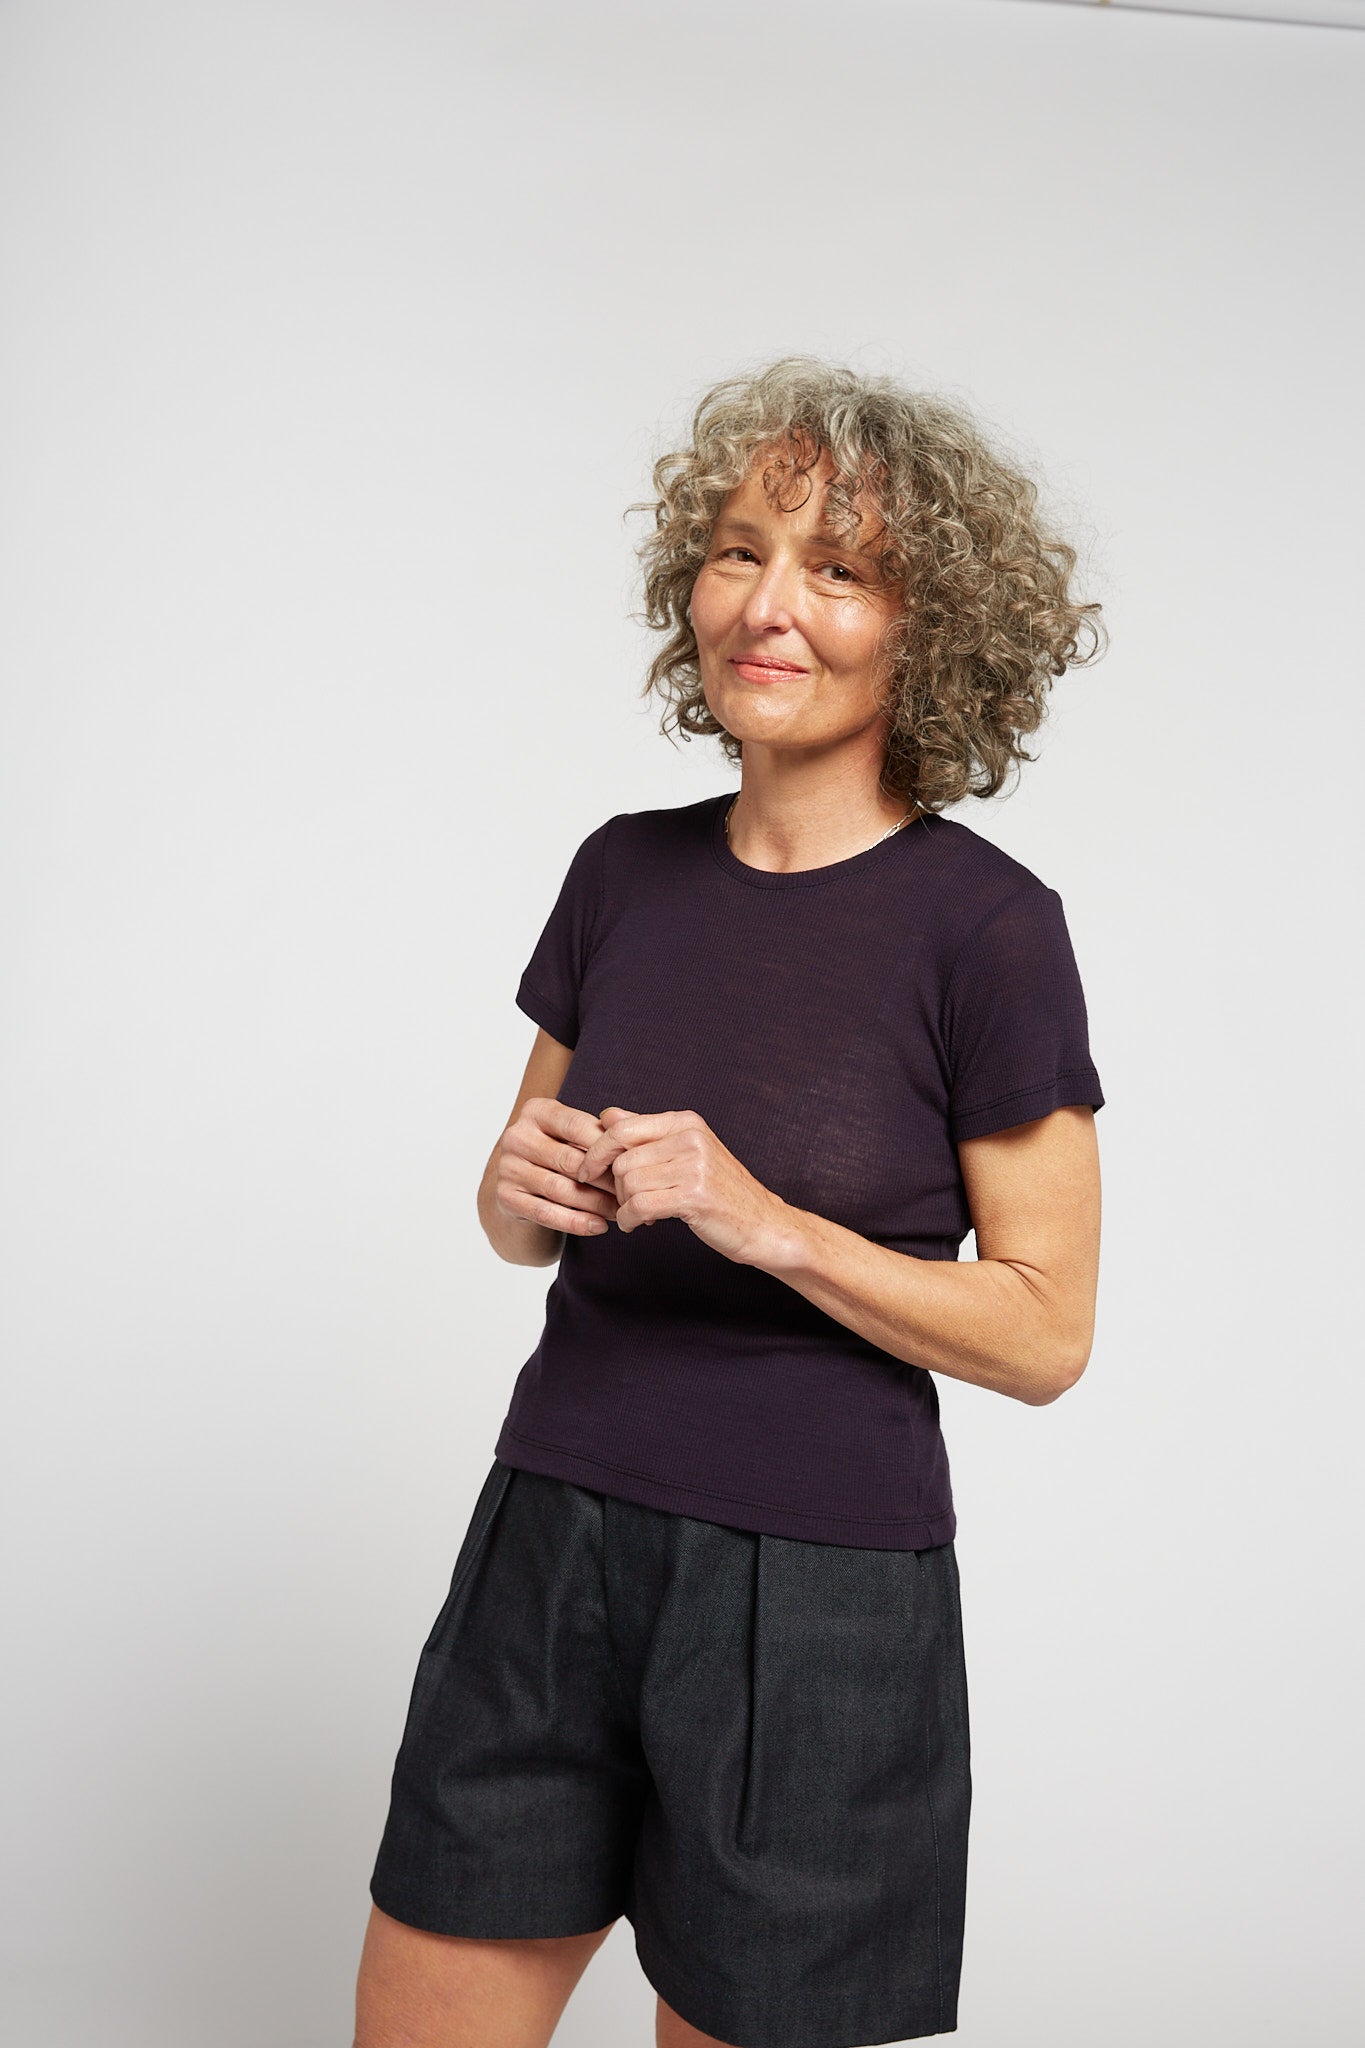 A.BCH A.34 Aubergine Short Sleeve Thermal in Merino Wool